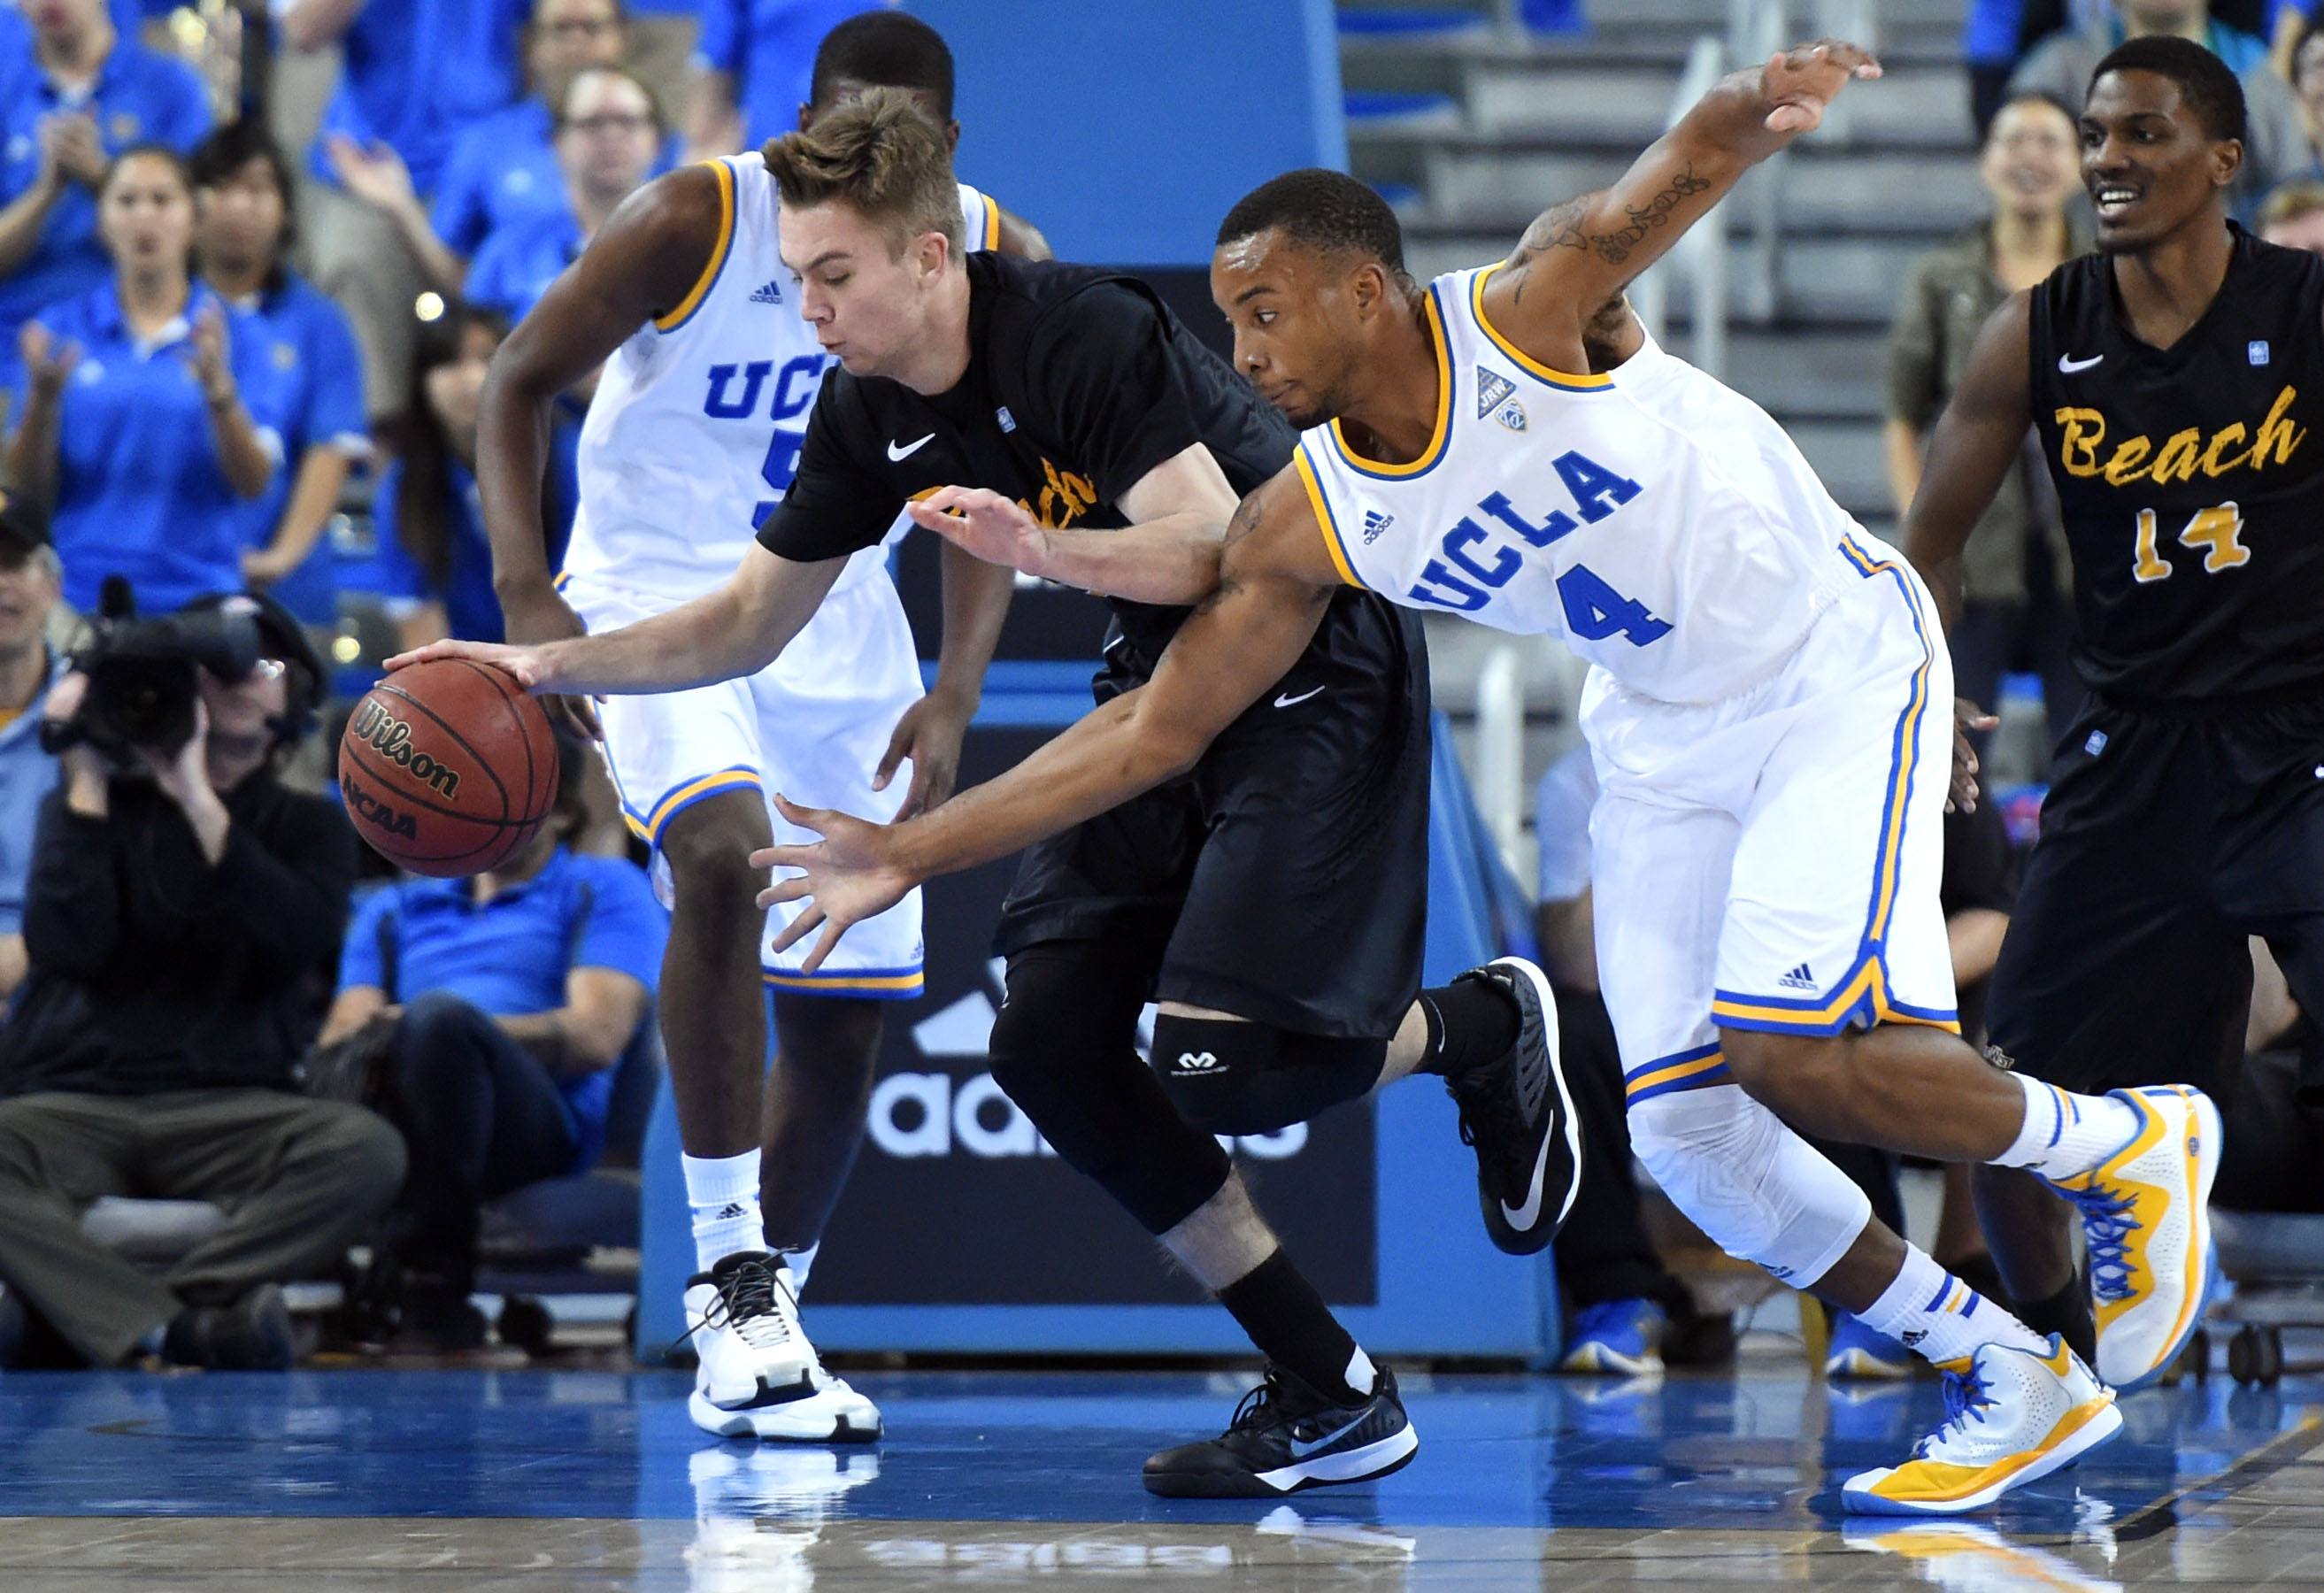 Norman Powell (4) goes for a steal during UCLA's 77-63 win over Long Beach State on Nov. 23. Powell finished the regular season leading the Bruins in points (16.3) and steals (60), and was named to the All-Pac-12 first team. (Stephen Carr/Staff)